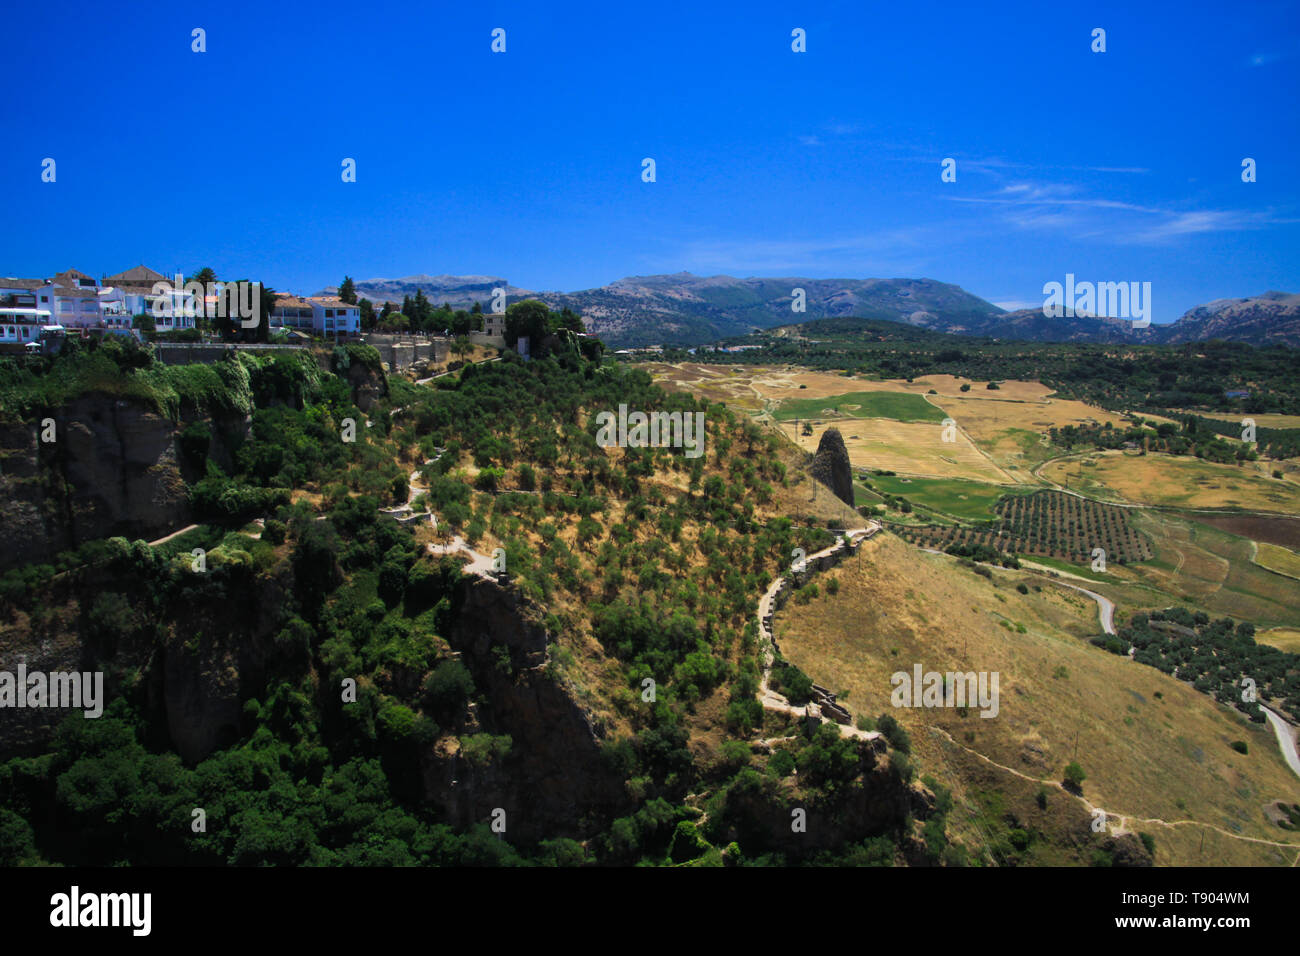 View on ancient village Ronda located on plateau surrounded by rural plains in Andalusia, Spain Stock Photo